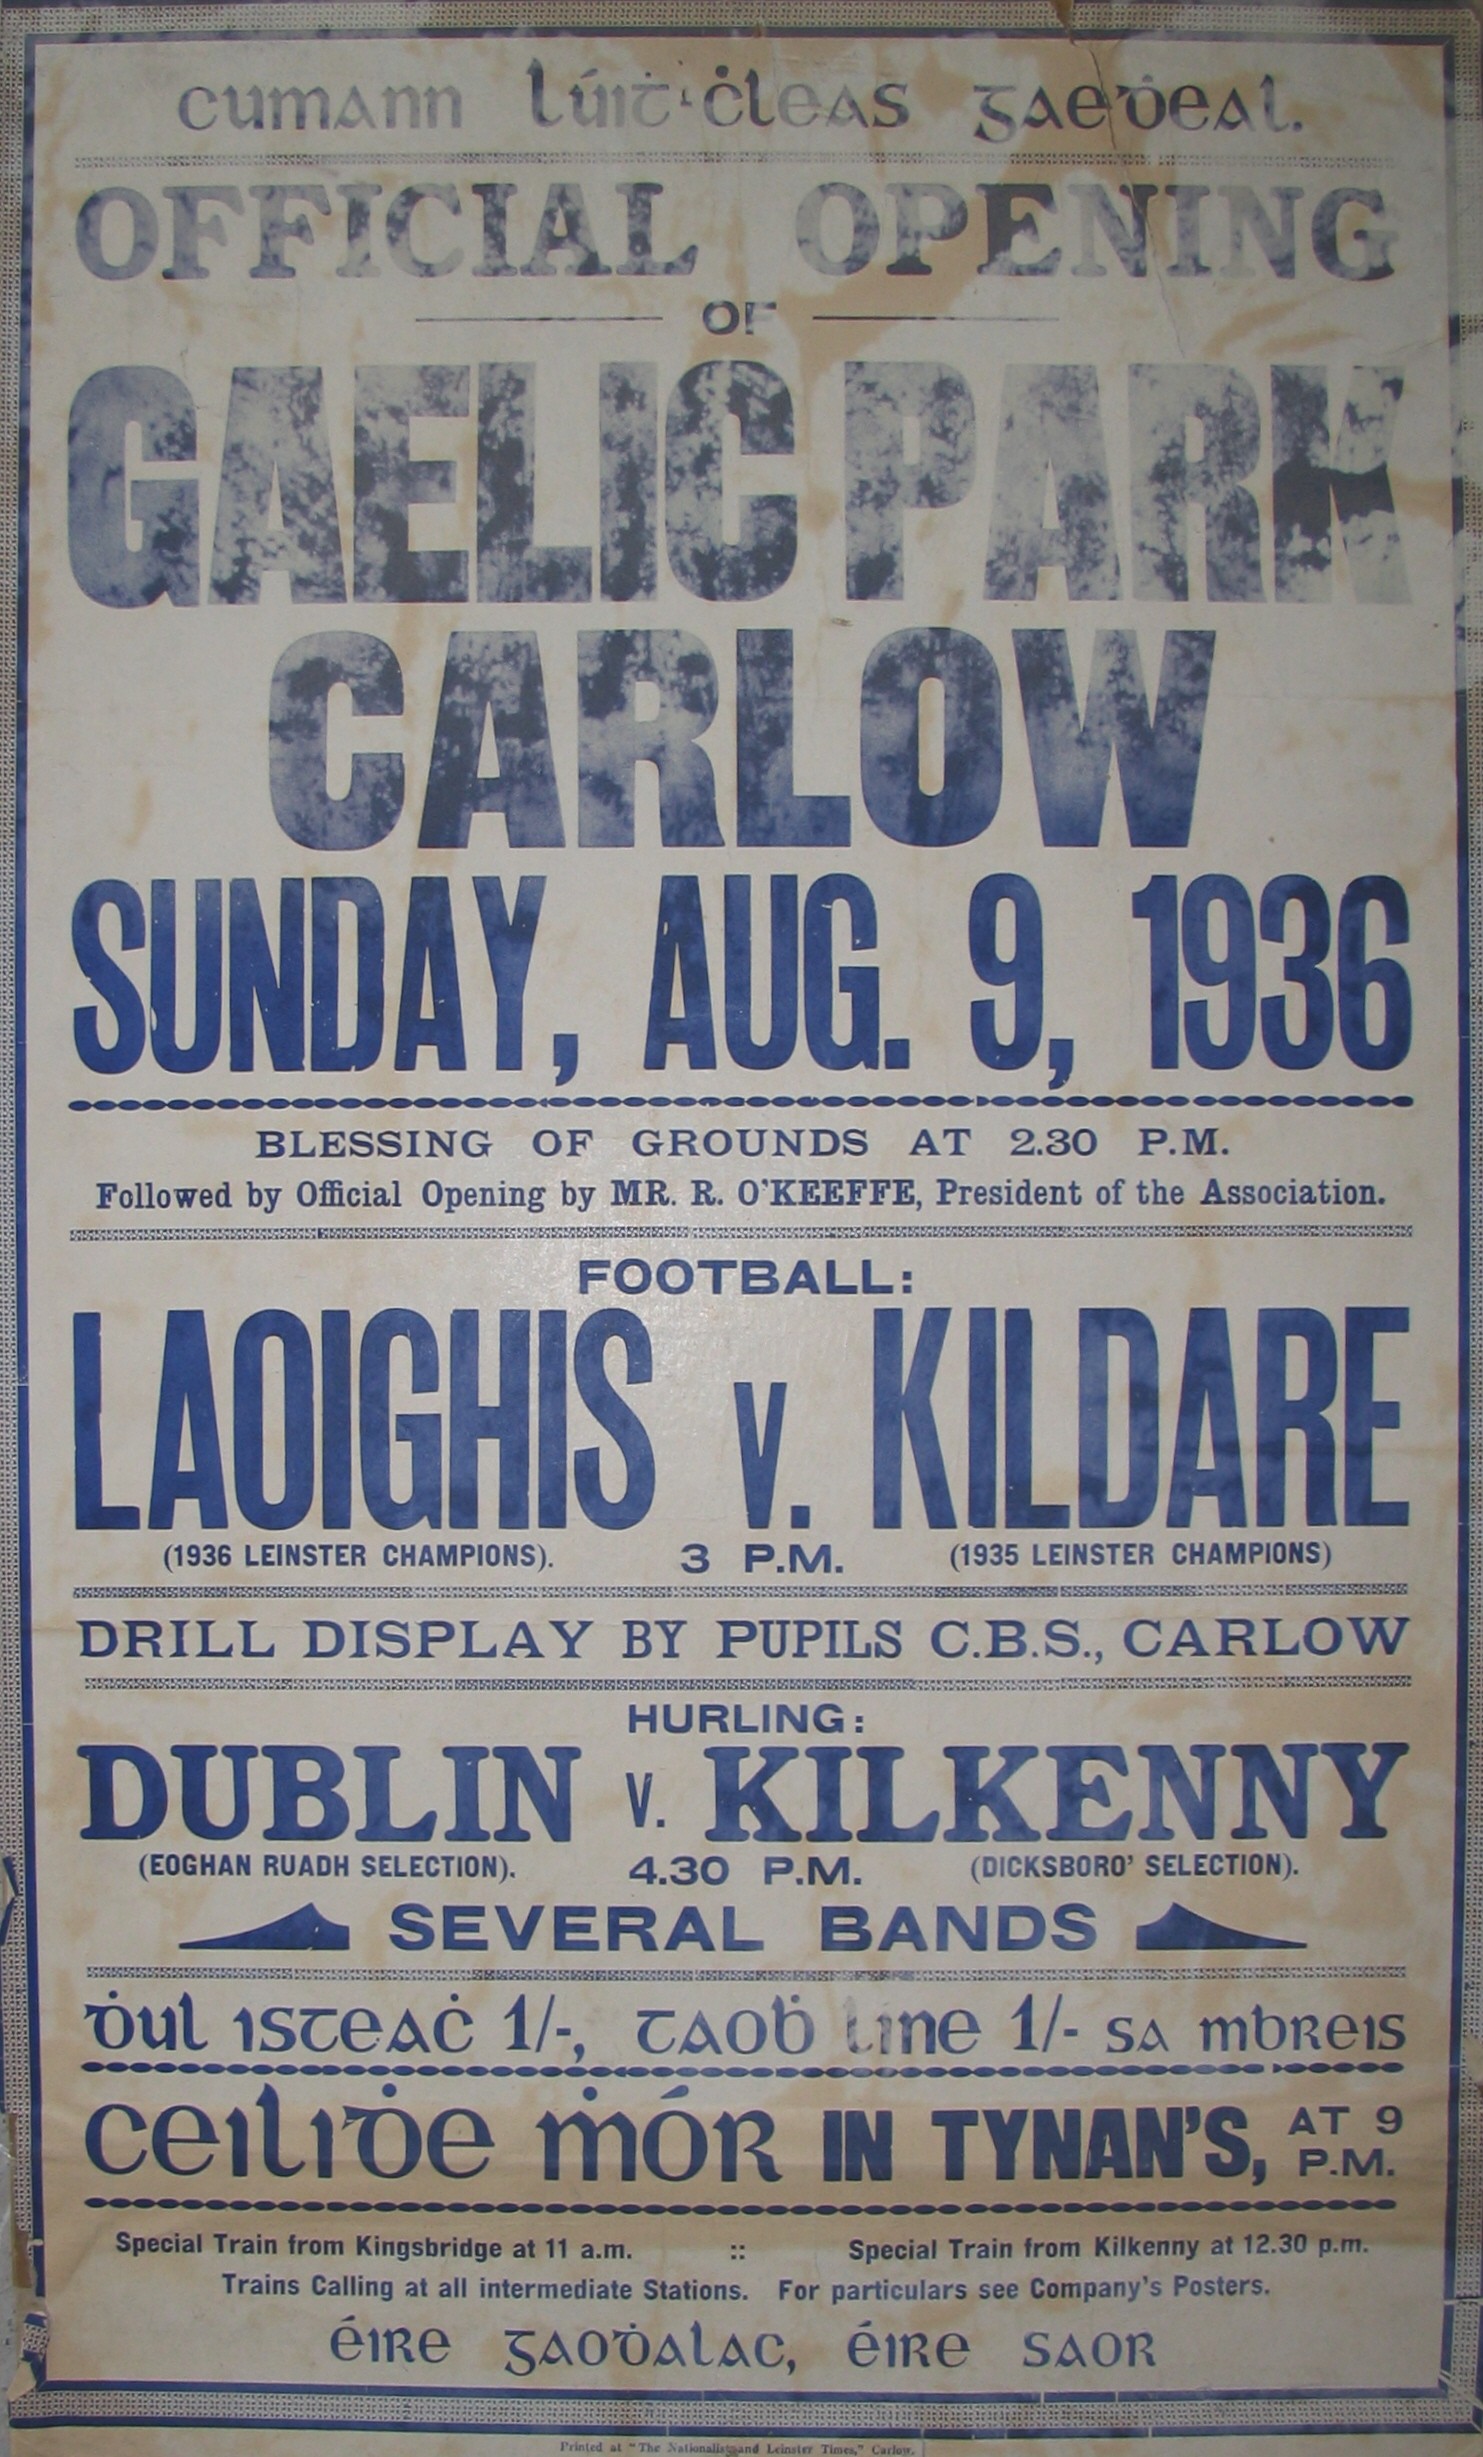 A poster advertising the official opening of Gaelic Park, Carlow, in 1936 illustrates the link between the GAA and Irish music and culture. Entertainment at the two opening matches was provided by several bands and celebrations continued in the evening with a céilí in Tynan's Hotel.